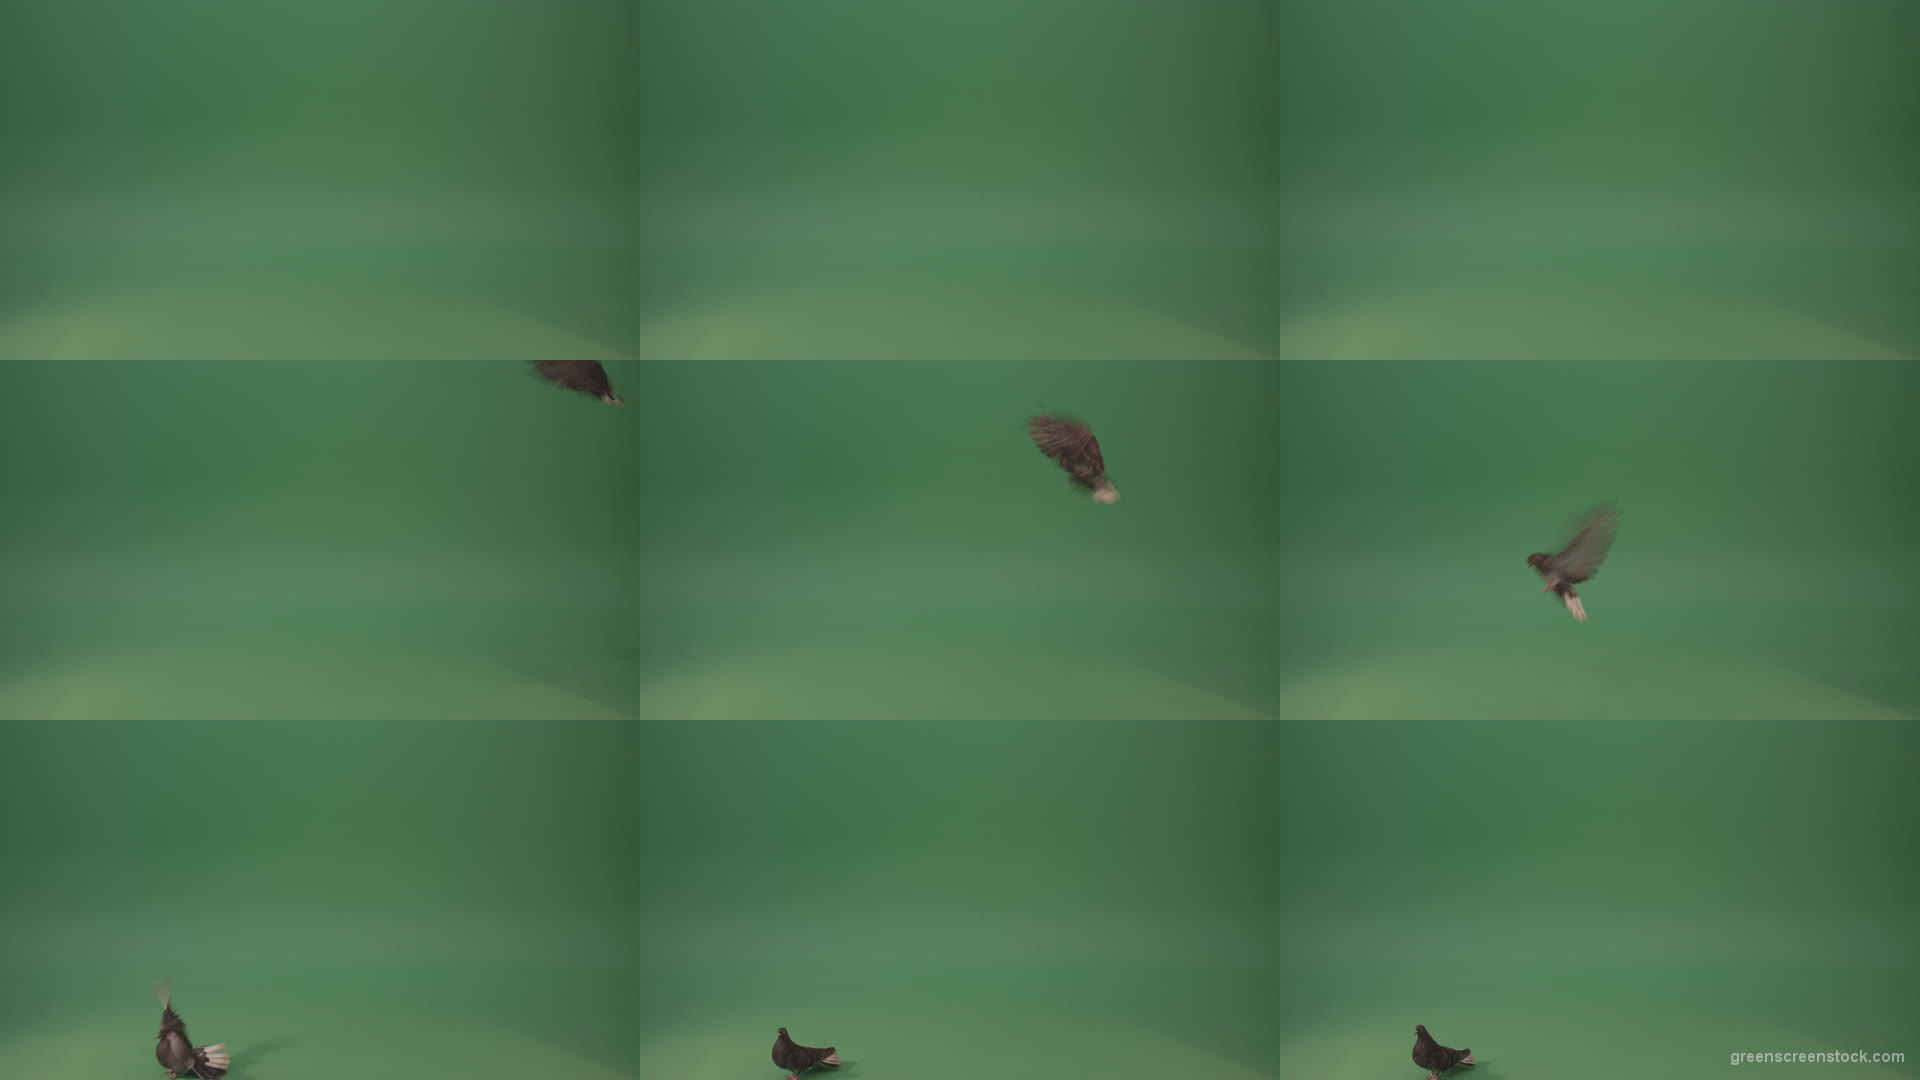 Dove-bird-flies-and-descends-to-the-ground-isolated-on-green-background Green Screen Stock